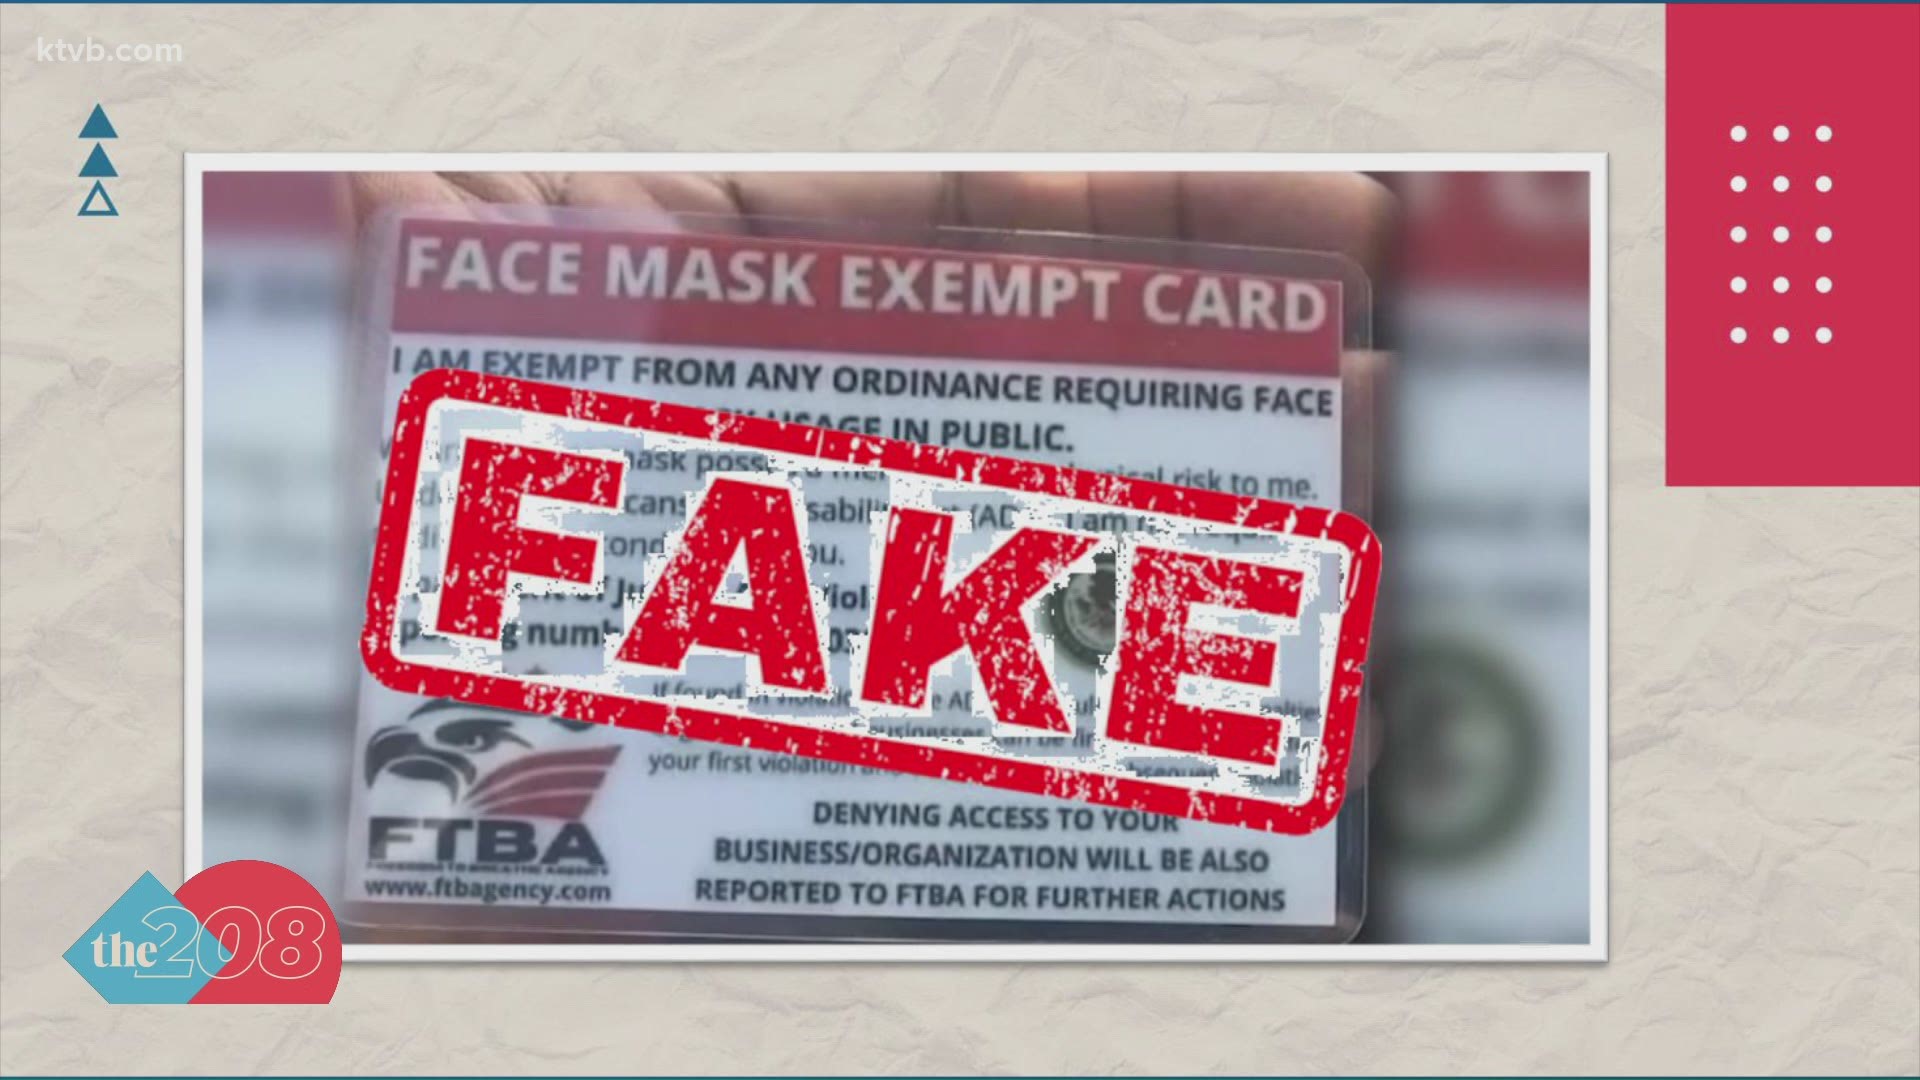 A Boise woman says she was wrongfully denied service at a local restaurant because she did not have a mask on, though she claimed to have an exemption medical card.